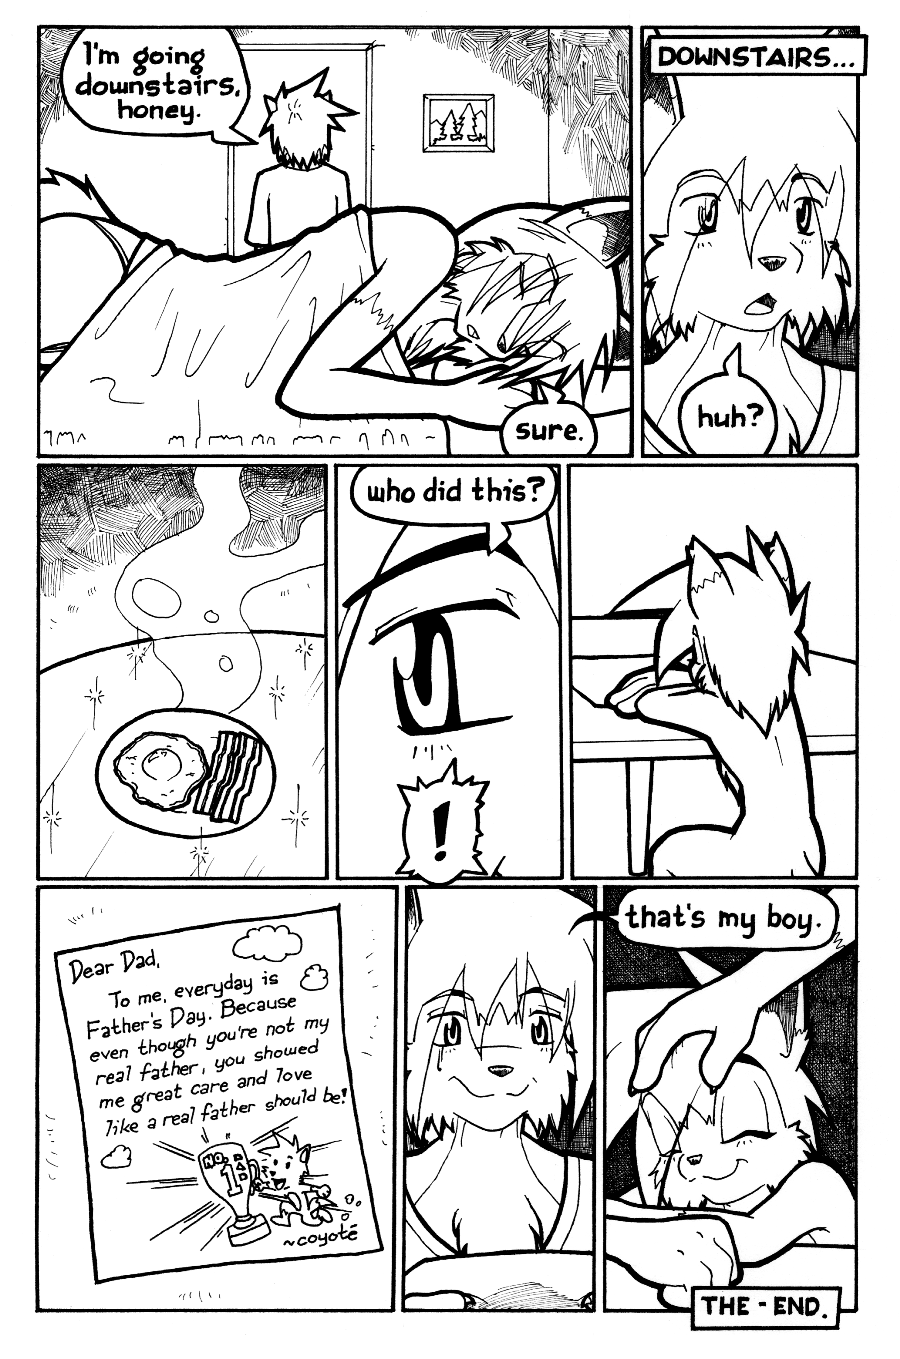 COYOTE : Father's Day Pg. 5